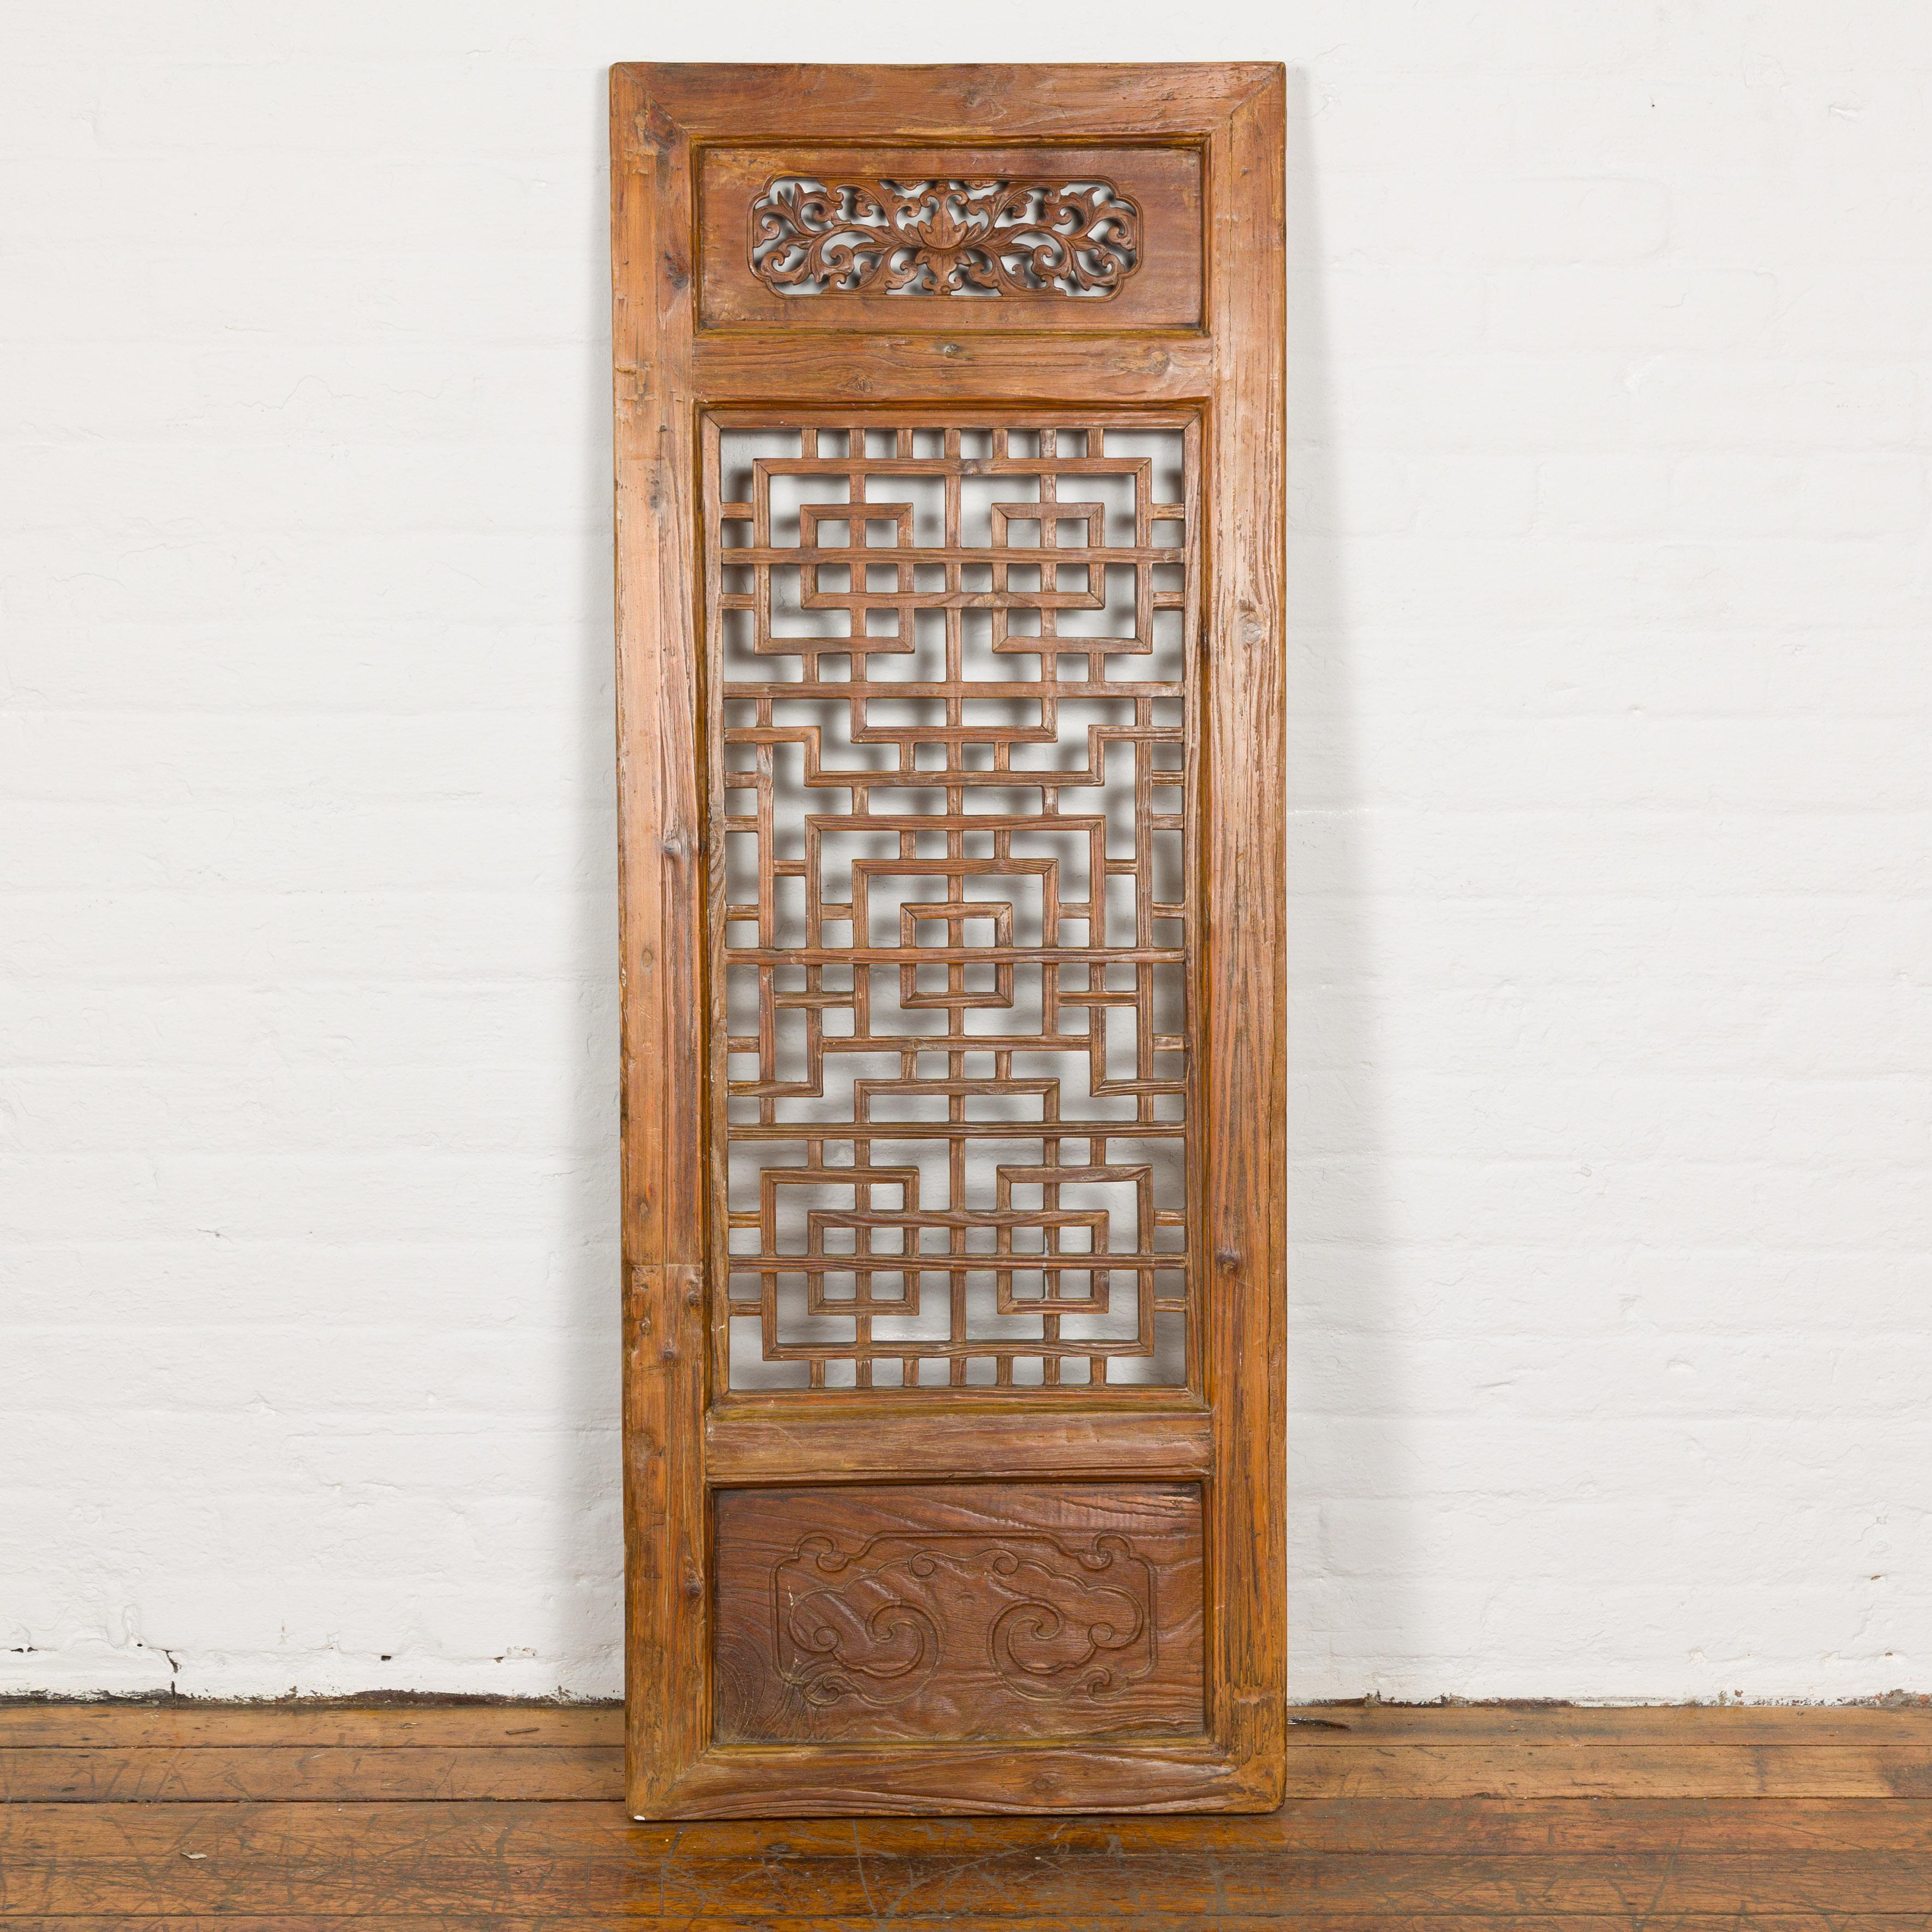 Chinese Qing Dynasty 19th Century Fretwork Screen with Carved Scrolling Motifs In Good Condition For Sale In Yonkers, NY